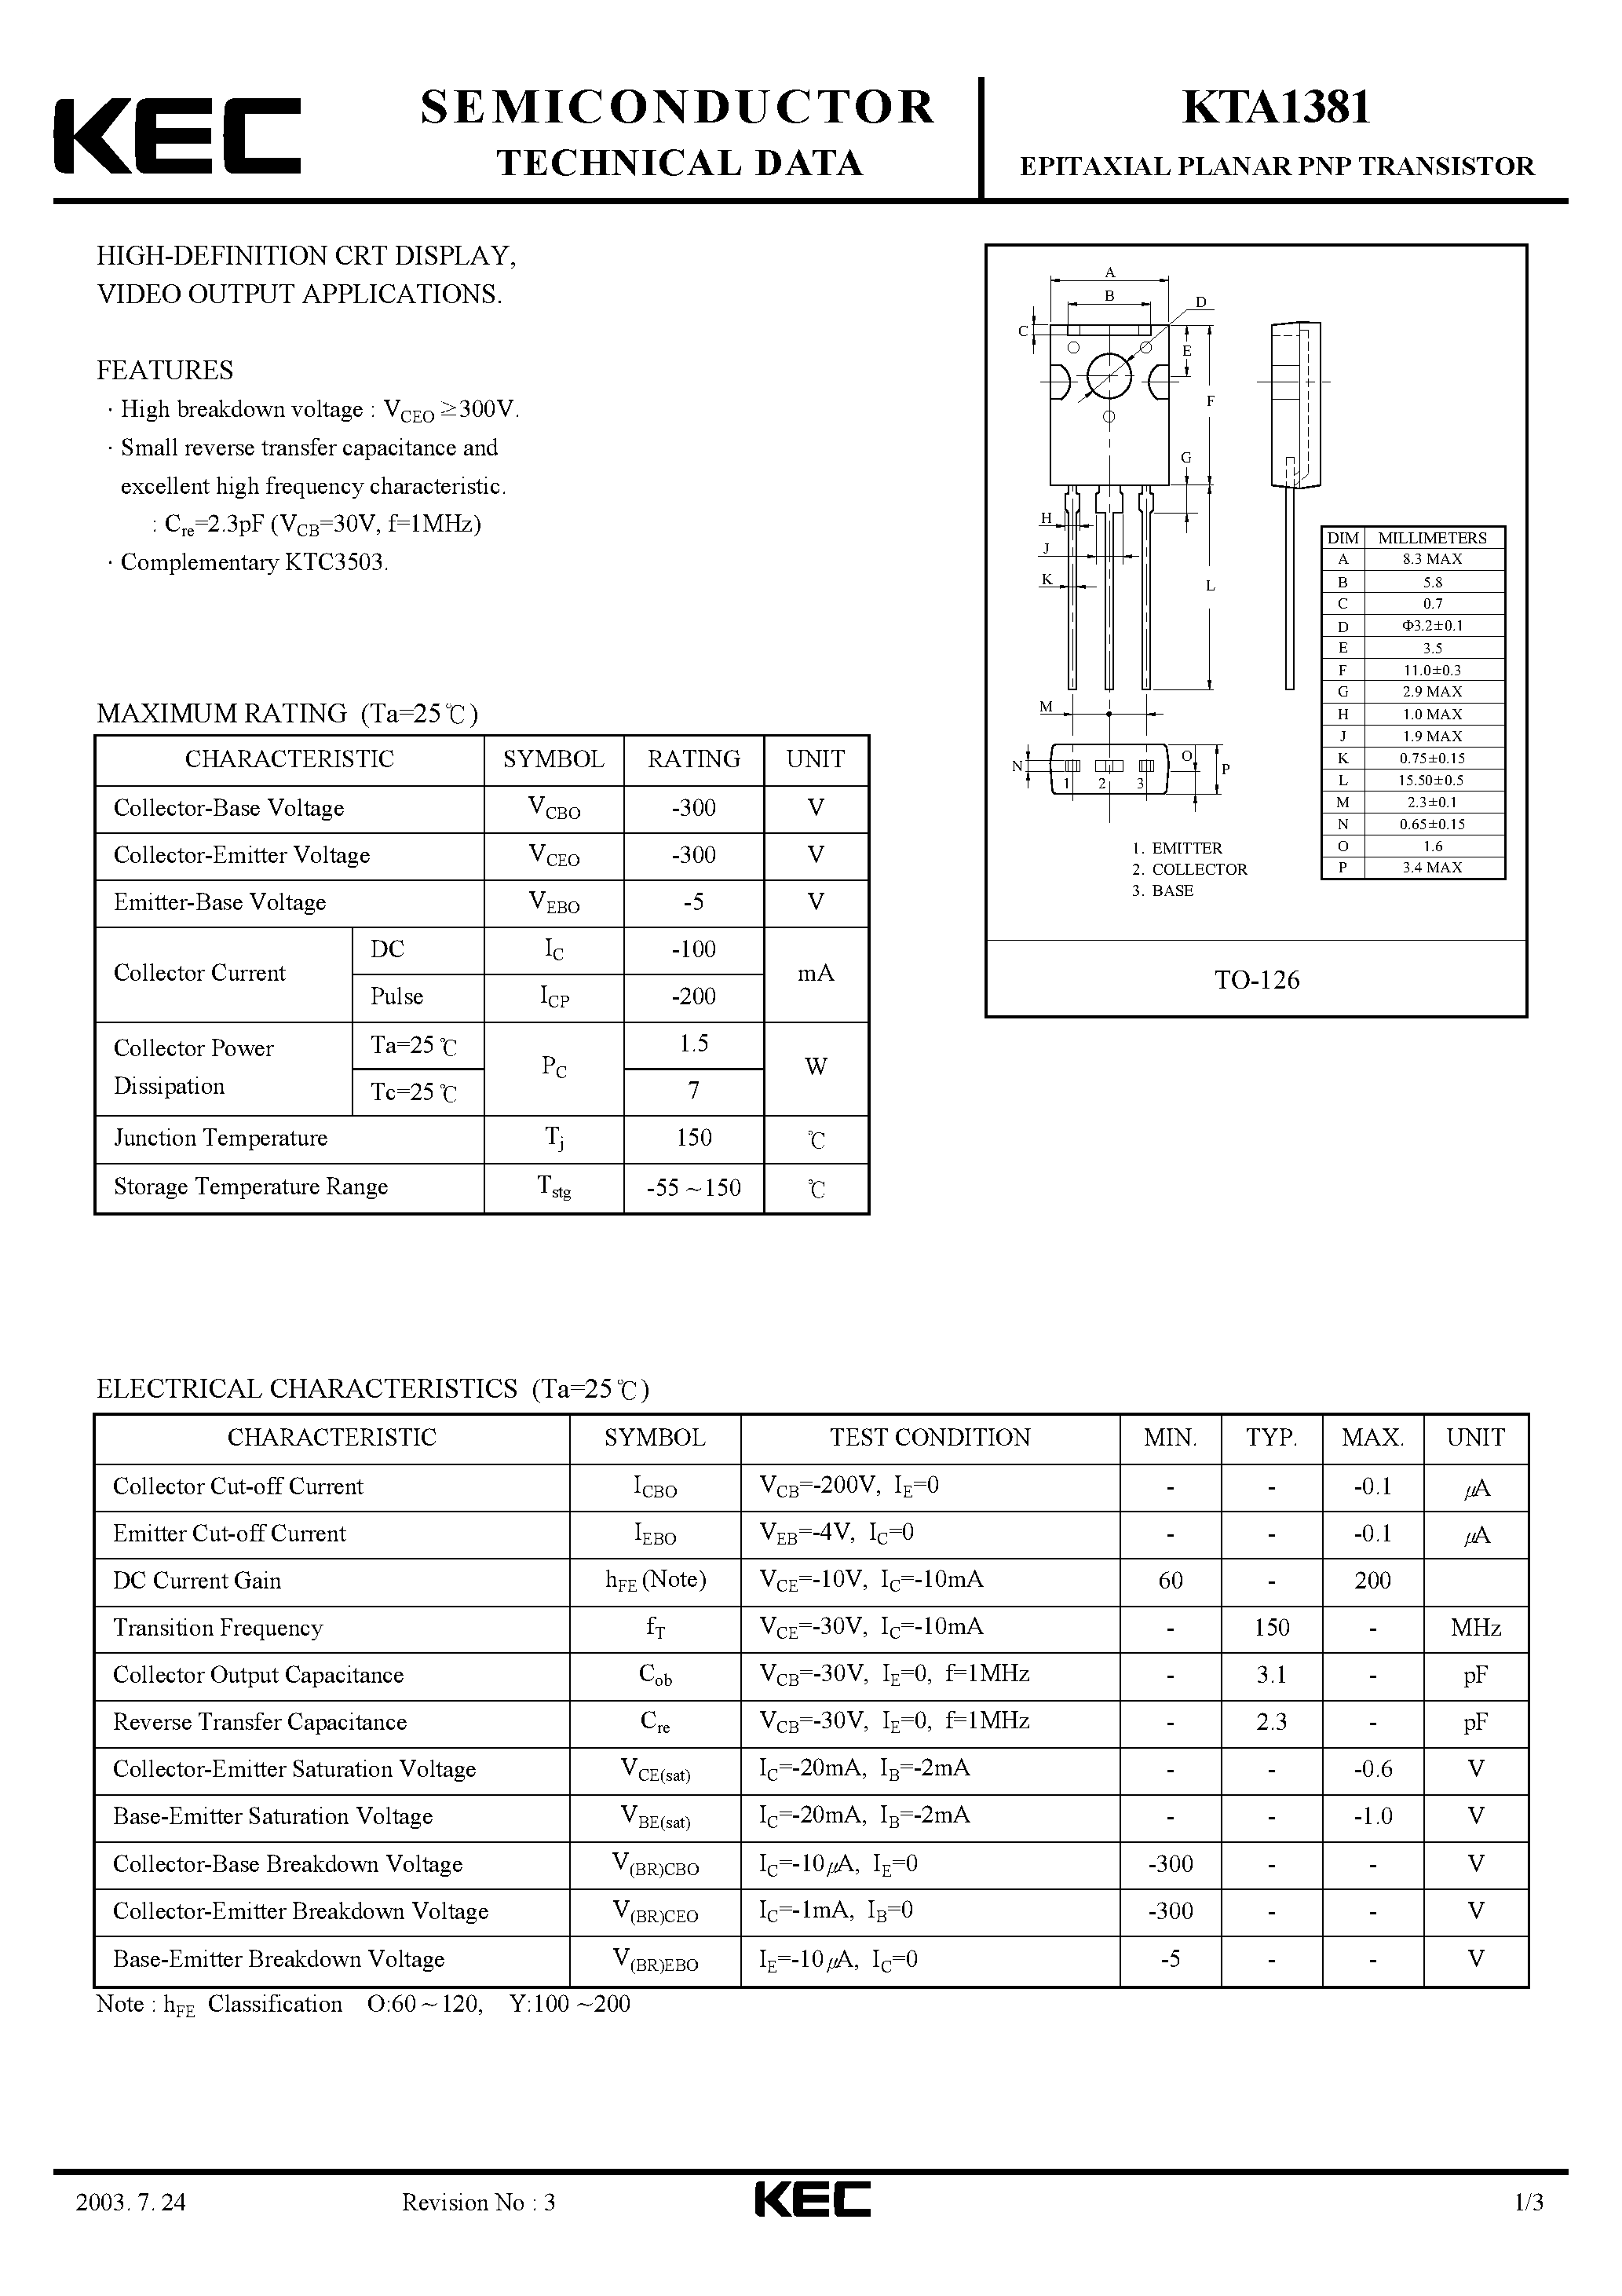 Datasheet KTA1381 - EPITAXIAL PLANAR PNP TRANSISTOR (HIGH-DIFFINITION CRT DISPLAY VIDEO OUTPUT) page 1